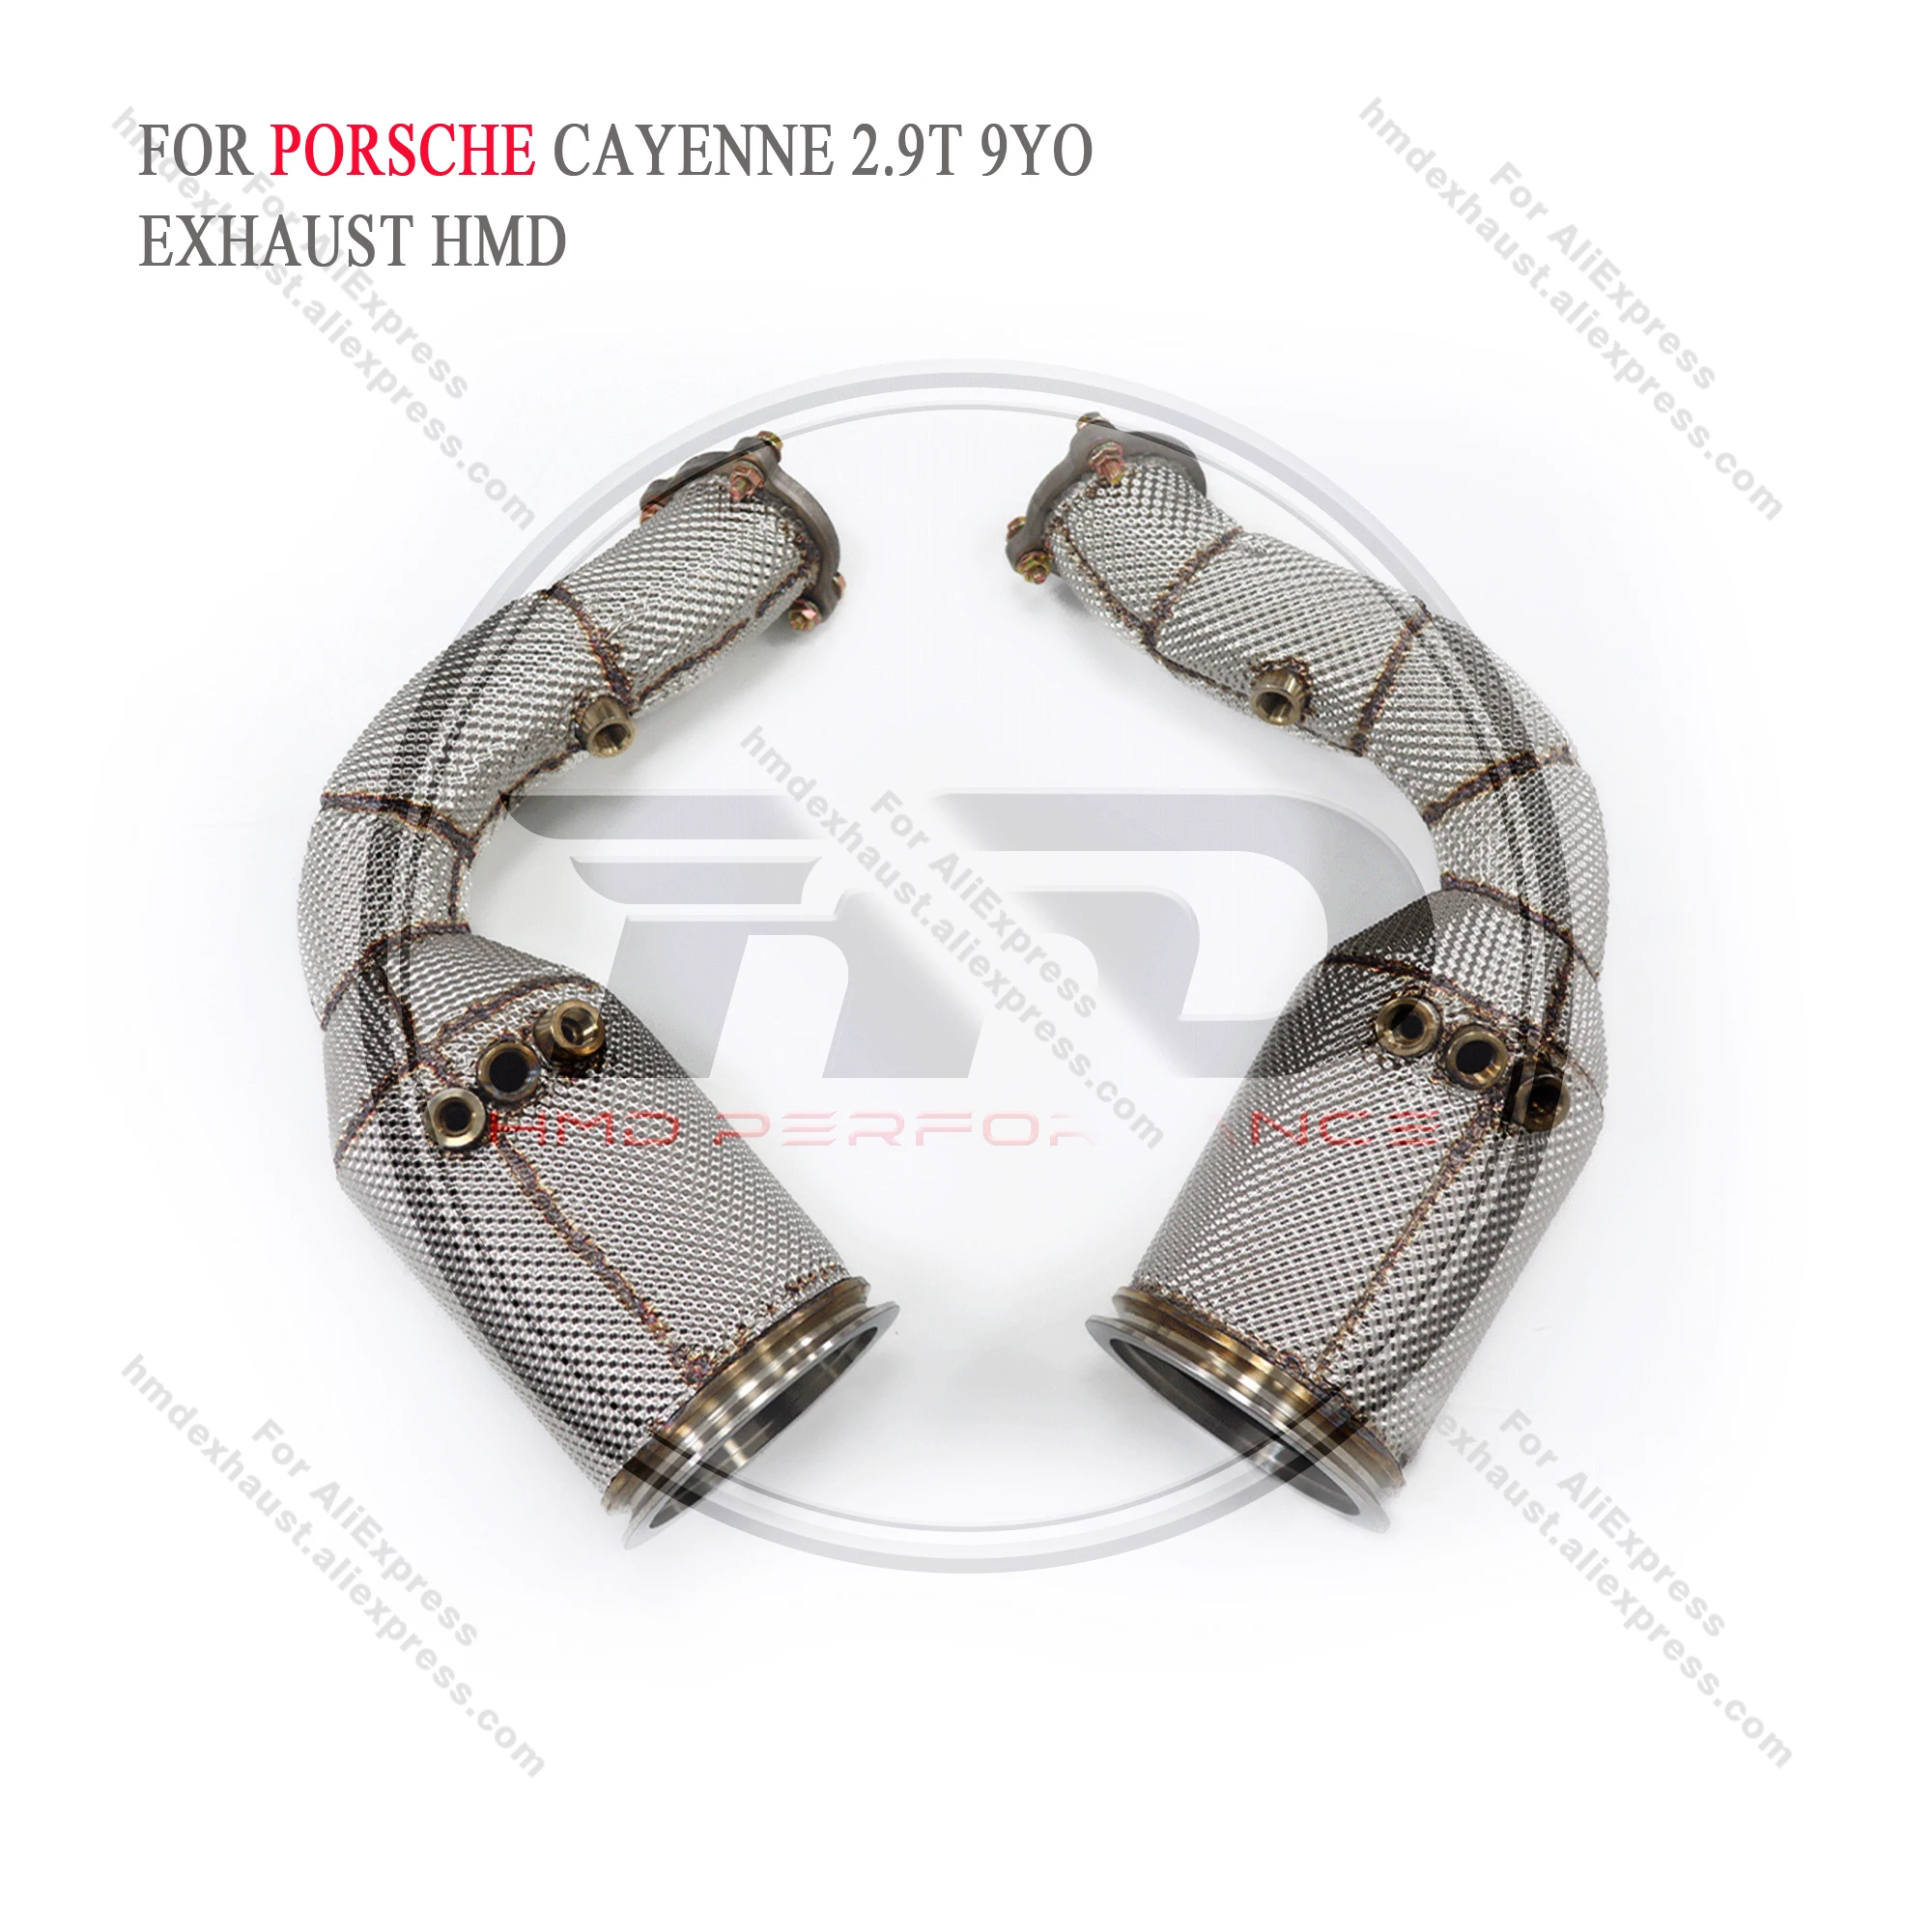 

HMD Exhaust System High Flow Performance Downpipe for Porsche cayenne 9YO 2.9T With OPF Heat Shield Racing Pipe